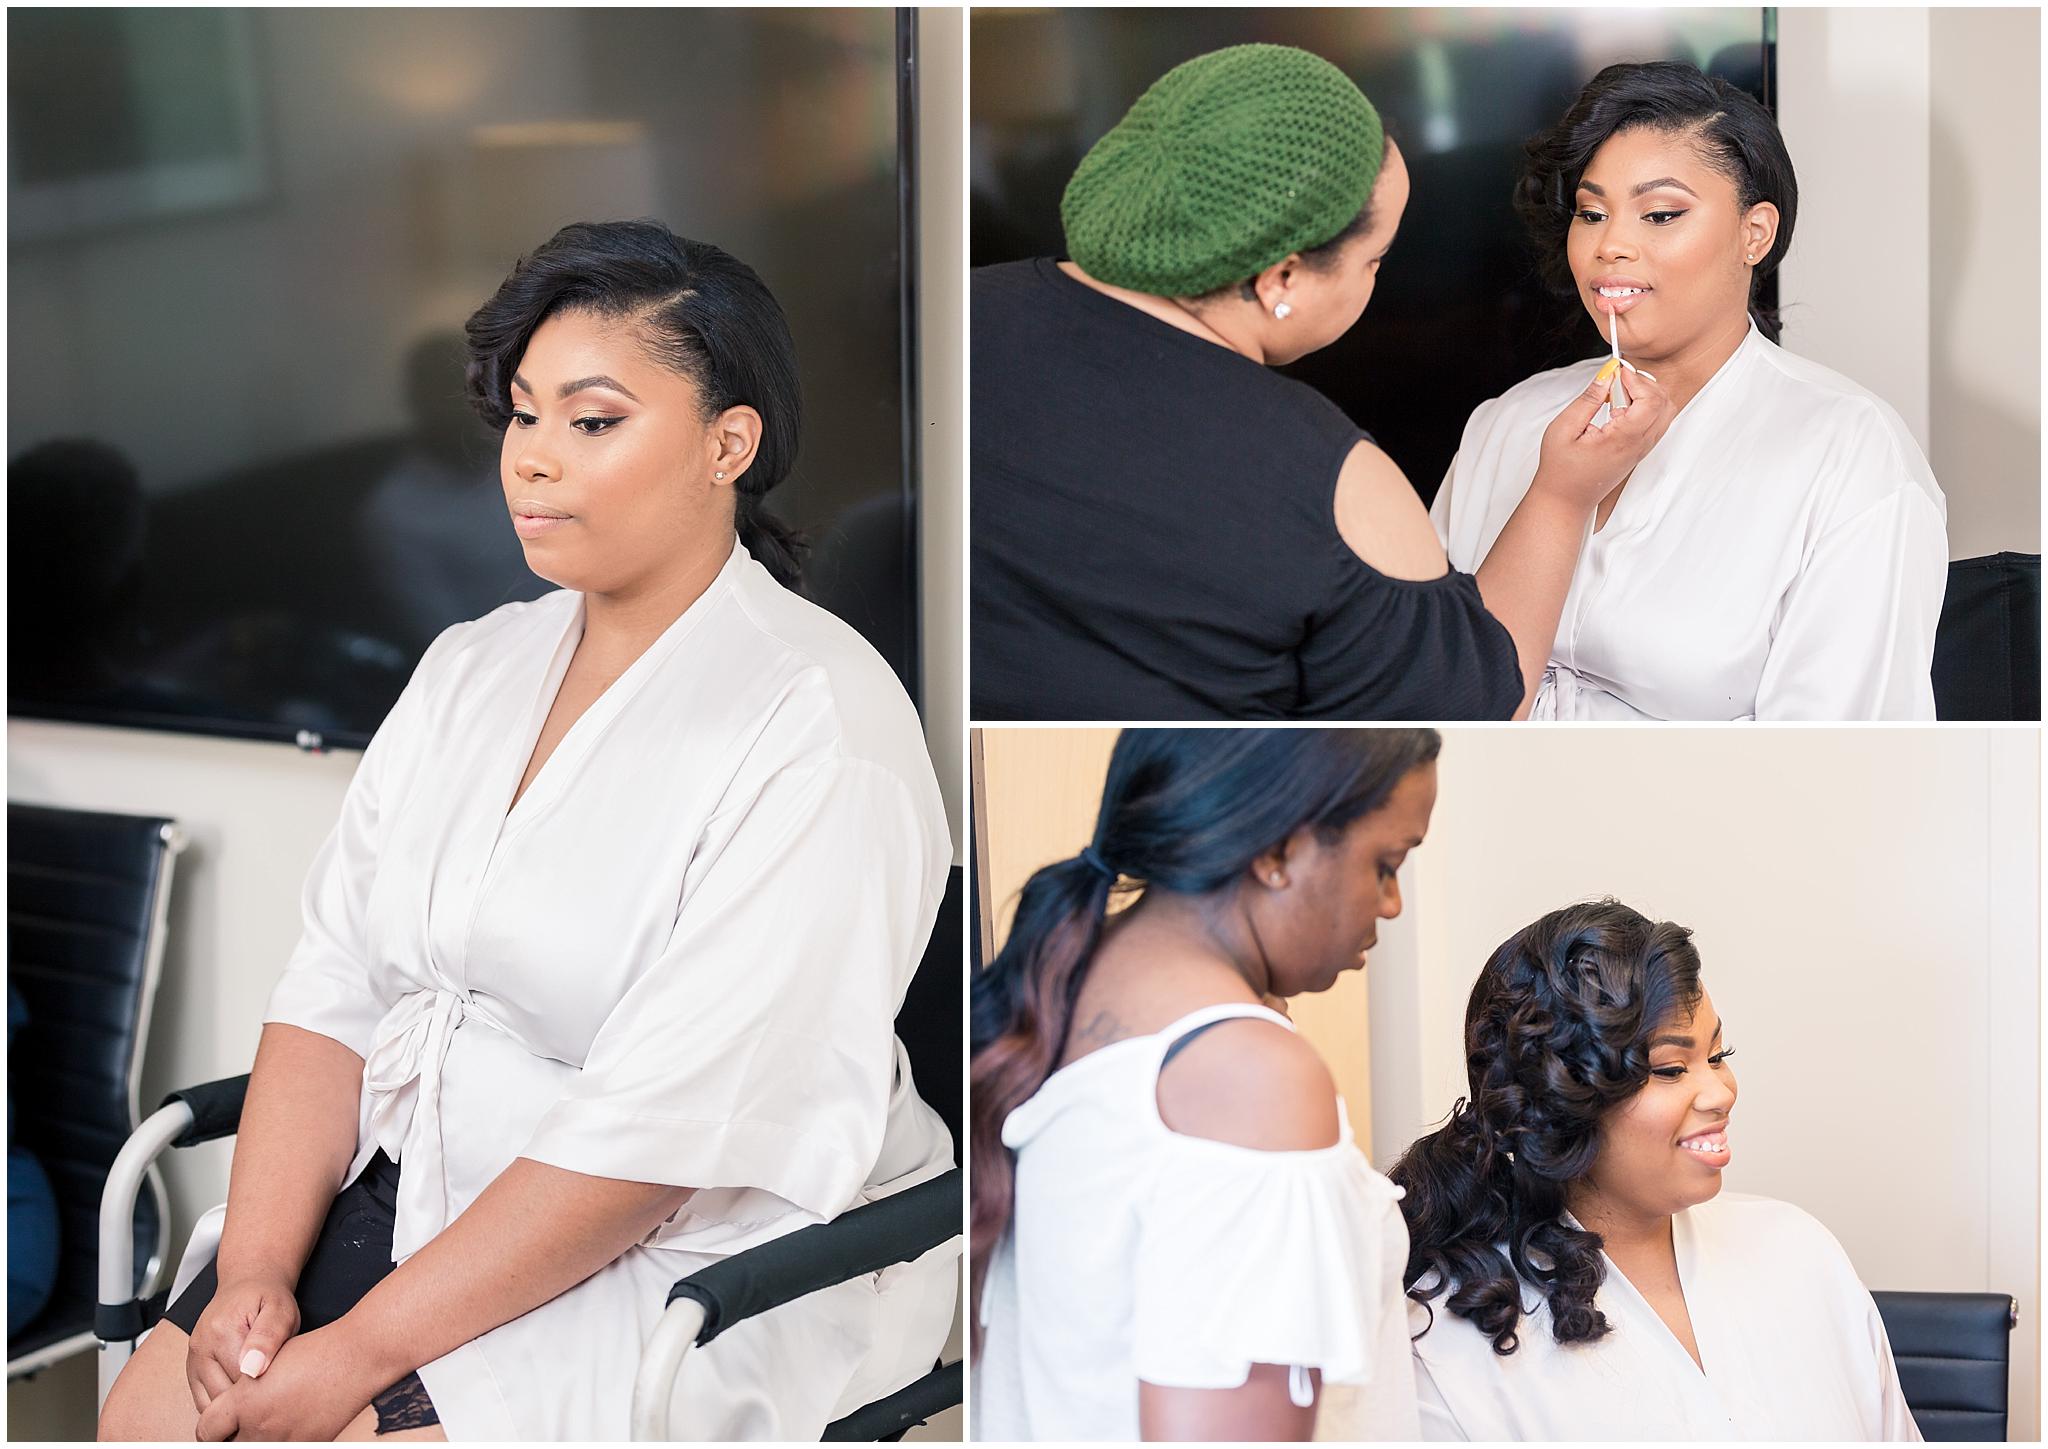 bride getting ready pictures wedding photographers in athens georgia